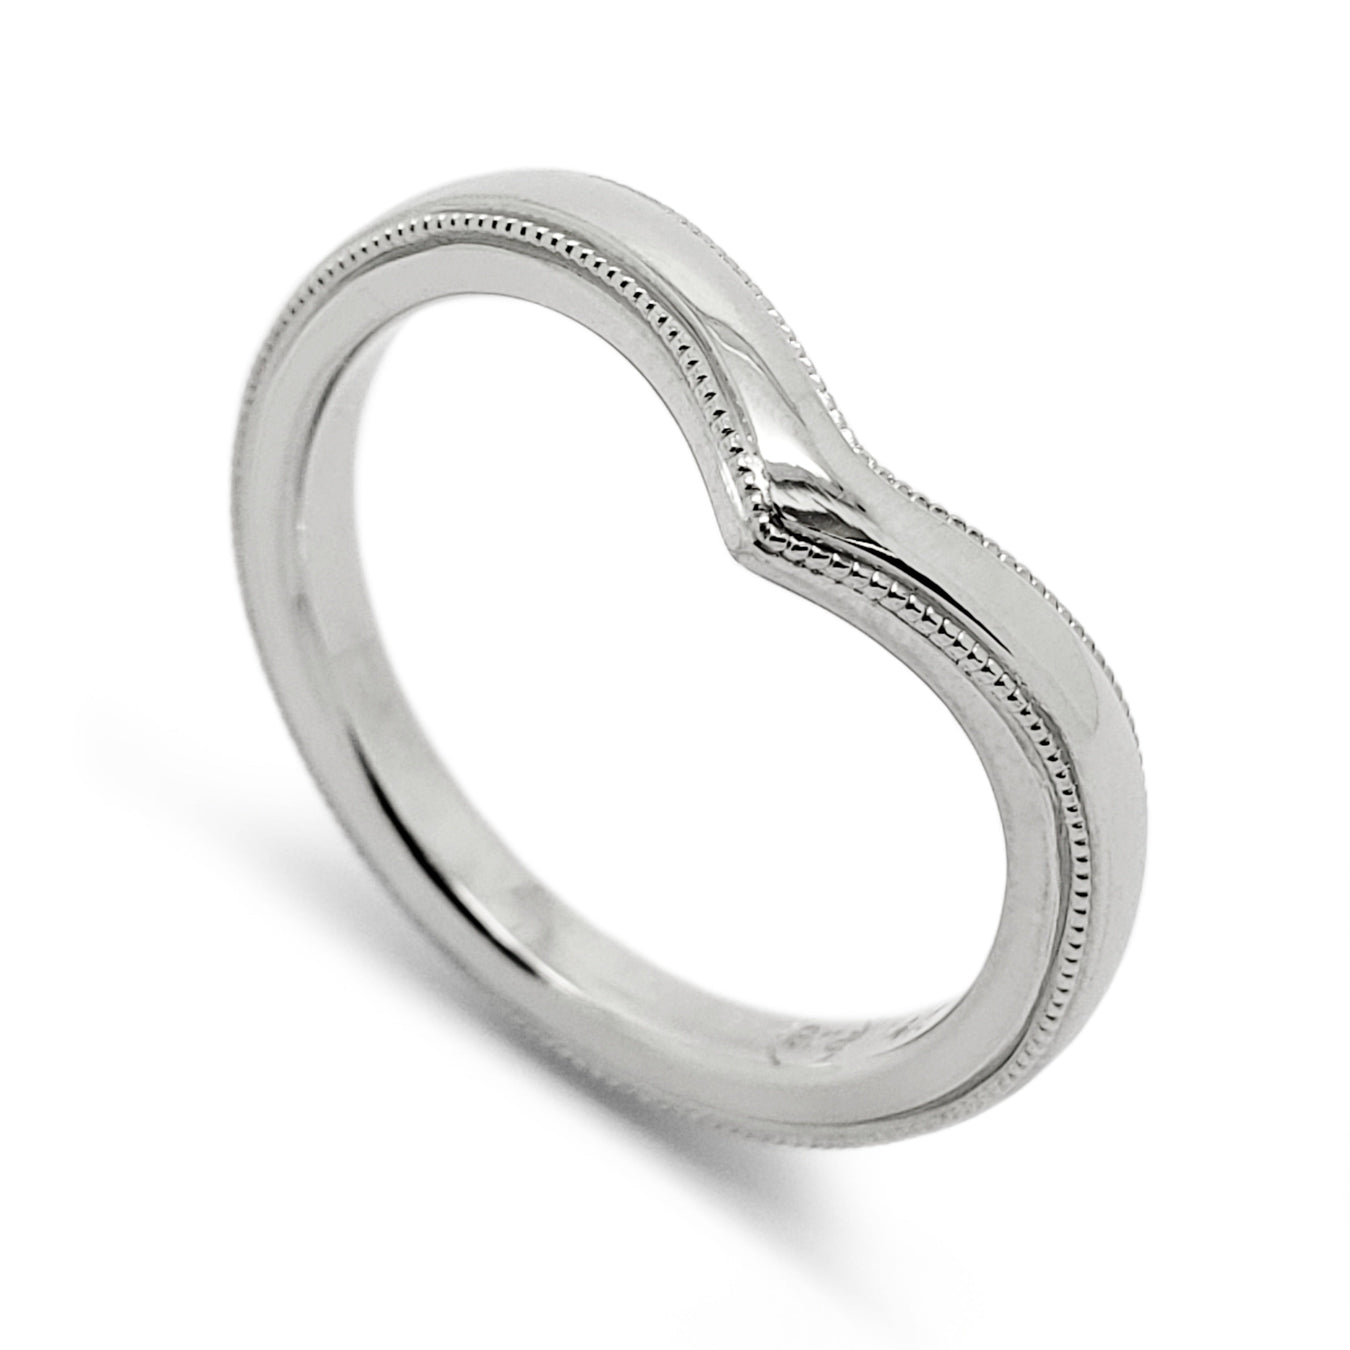 All In Stock Wedding Rings